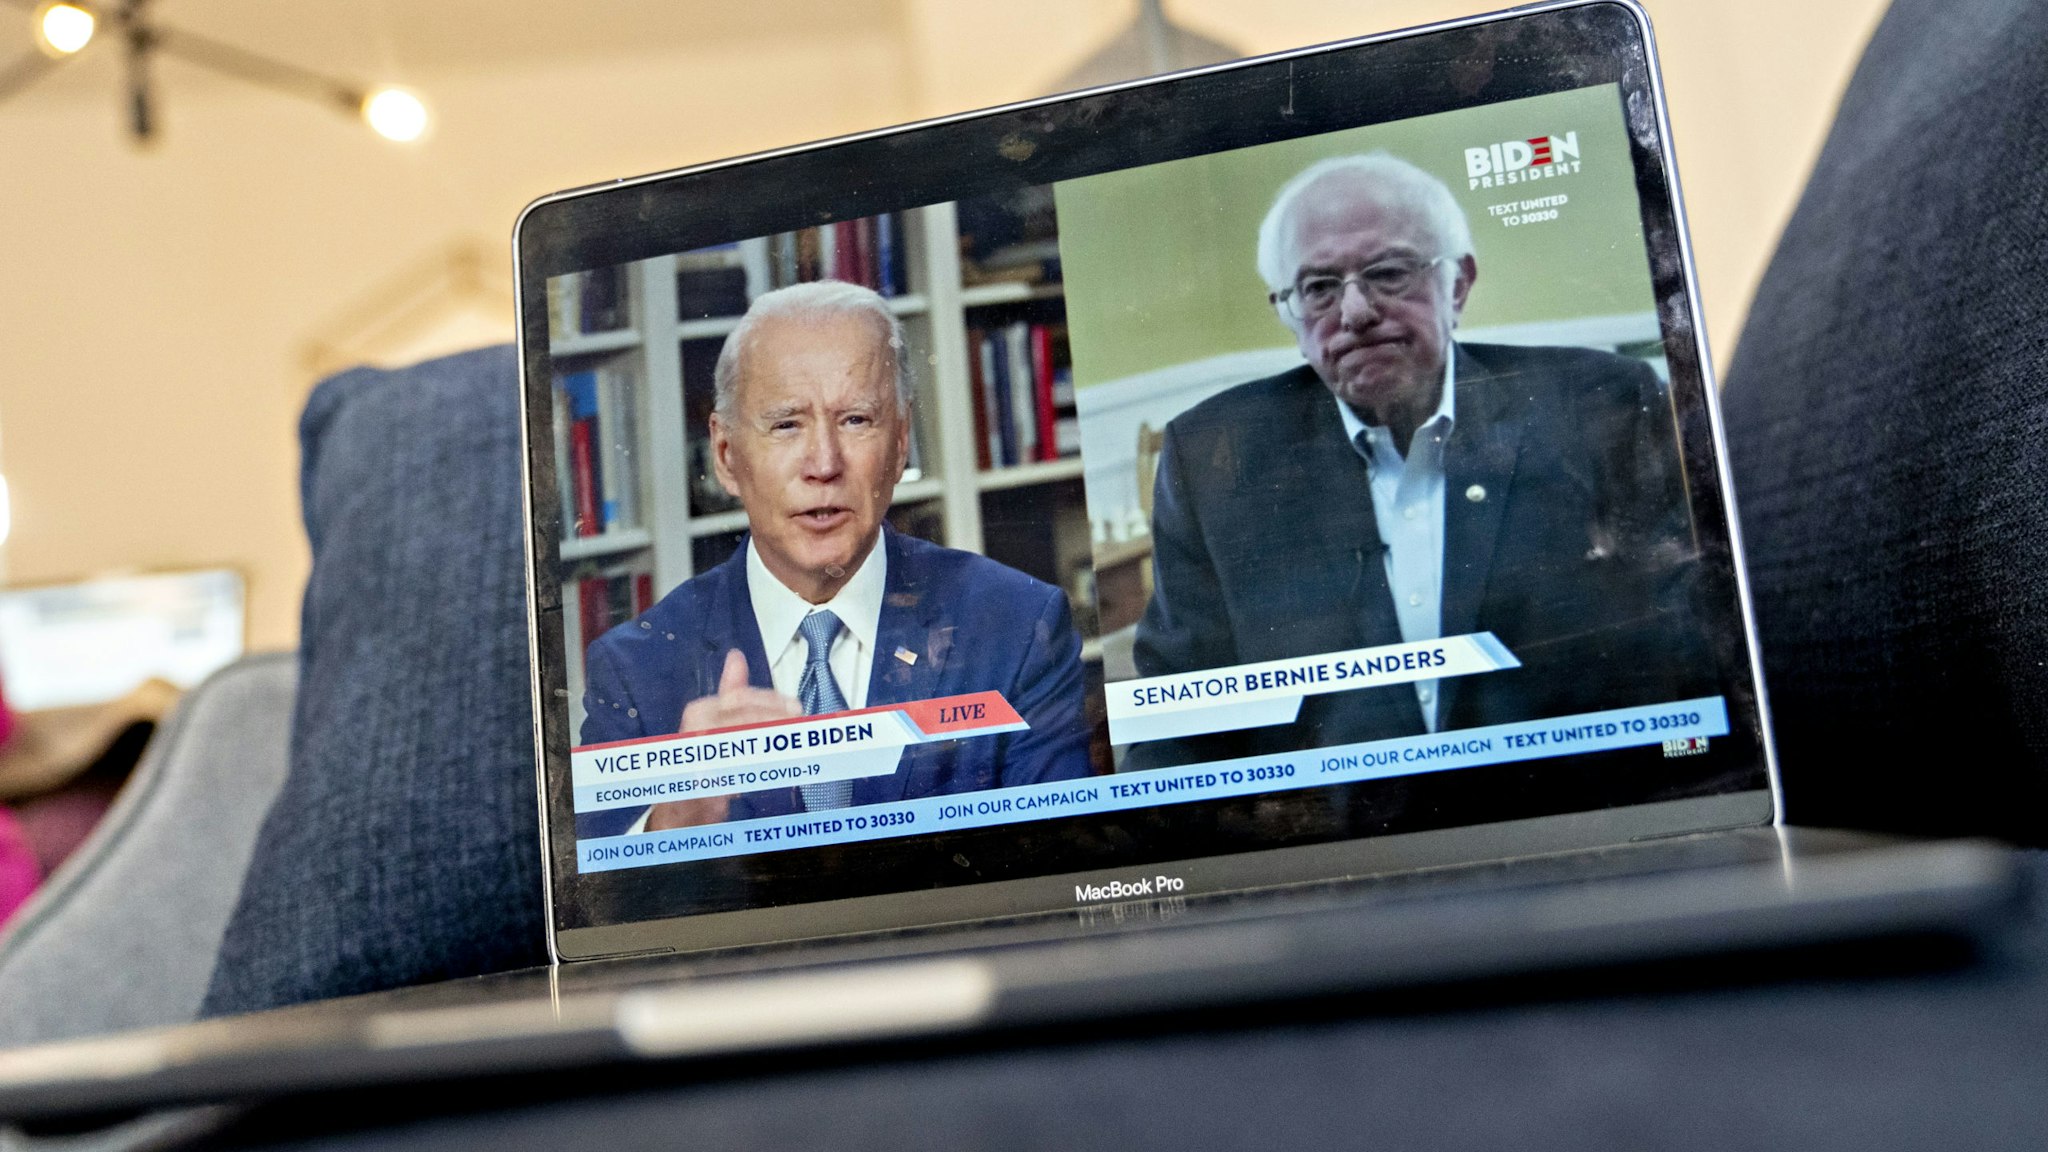 ormer Vice President Joe Biden, presumptive Democratic presidential nominee, left, speaks as Senator Bernie Sanders, an Independent from Vermont, right, listens during a virtual event seen on an Apple Inc. laptop computer in Arlington, Virginia, U.S., on Monday, April 13, 2020. Sanders endorsed Biden during the joint livestream saying that Americans of all political affiliations should back the former vice president. Photographer: Andrew Harrer/Bloomberg via Getty Images